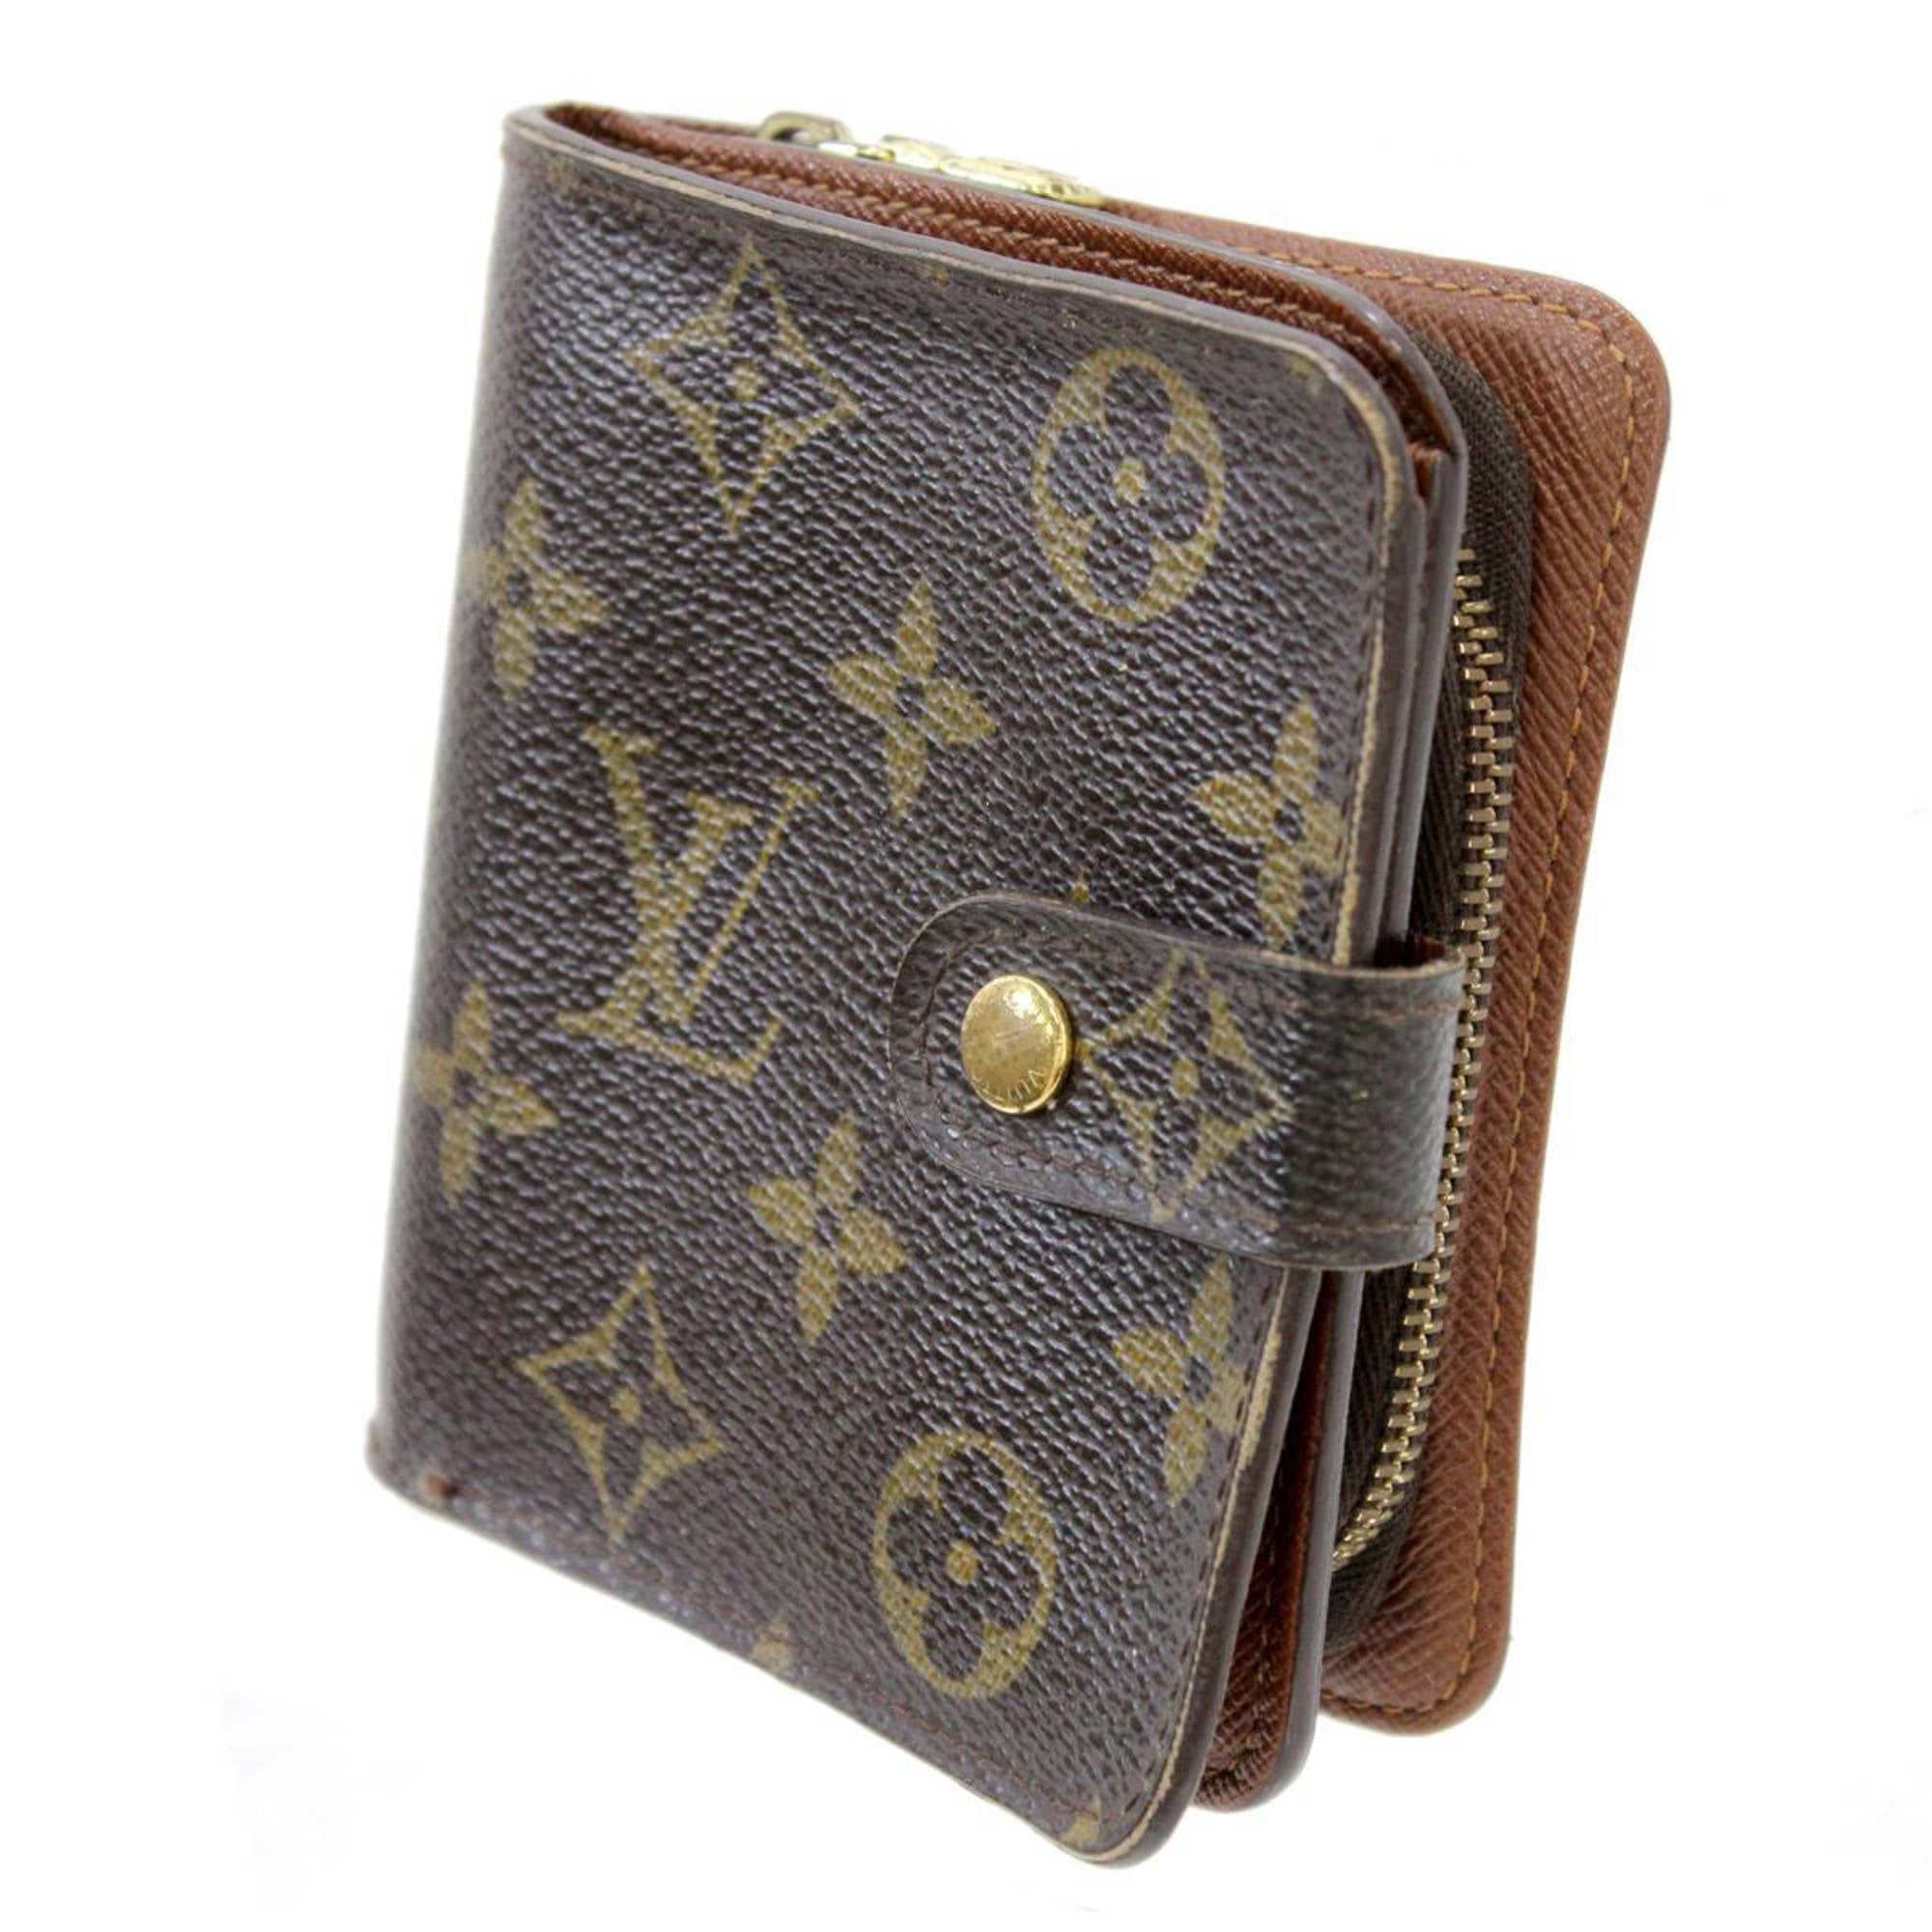 Authenticated Used LOUIS VUITTON zip bi-fold wallet leather monogram M61667 -